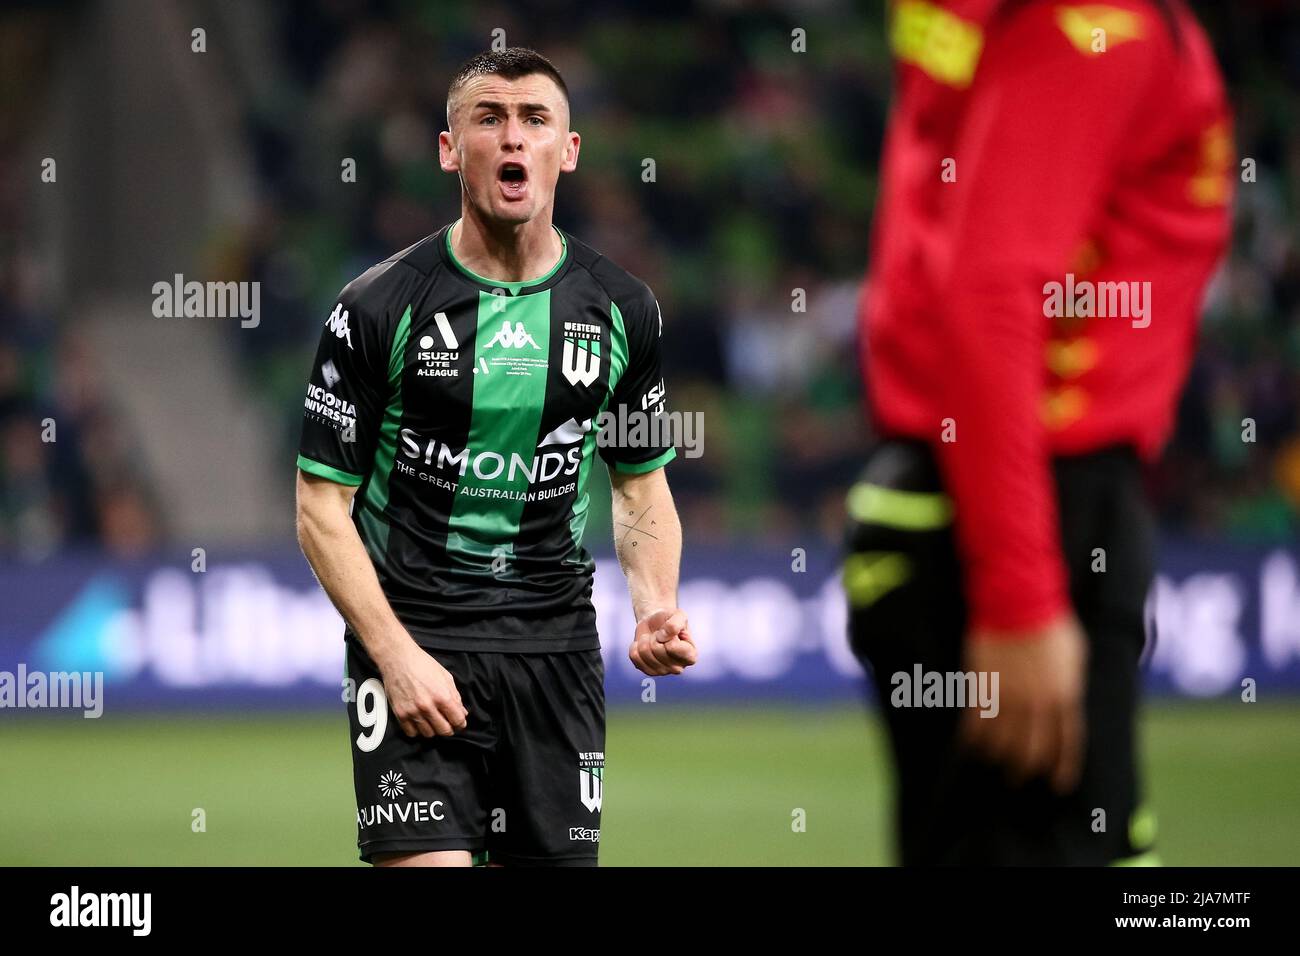 Melbourne, Australia, 28 May, 2022. Dylan Wenzel-Halls of Western United during the A-League Grand Final soccer match between Melbourne City FC and Western United at AAMI Park on May 28, 2022 in Melbourne, Australia. Credit: Dave Hewison/Speed Media/Alamy Live News Stock Photo